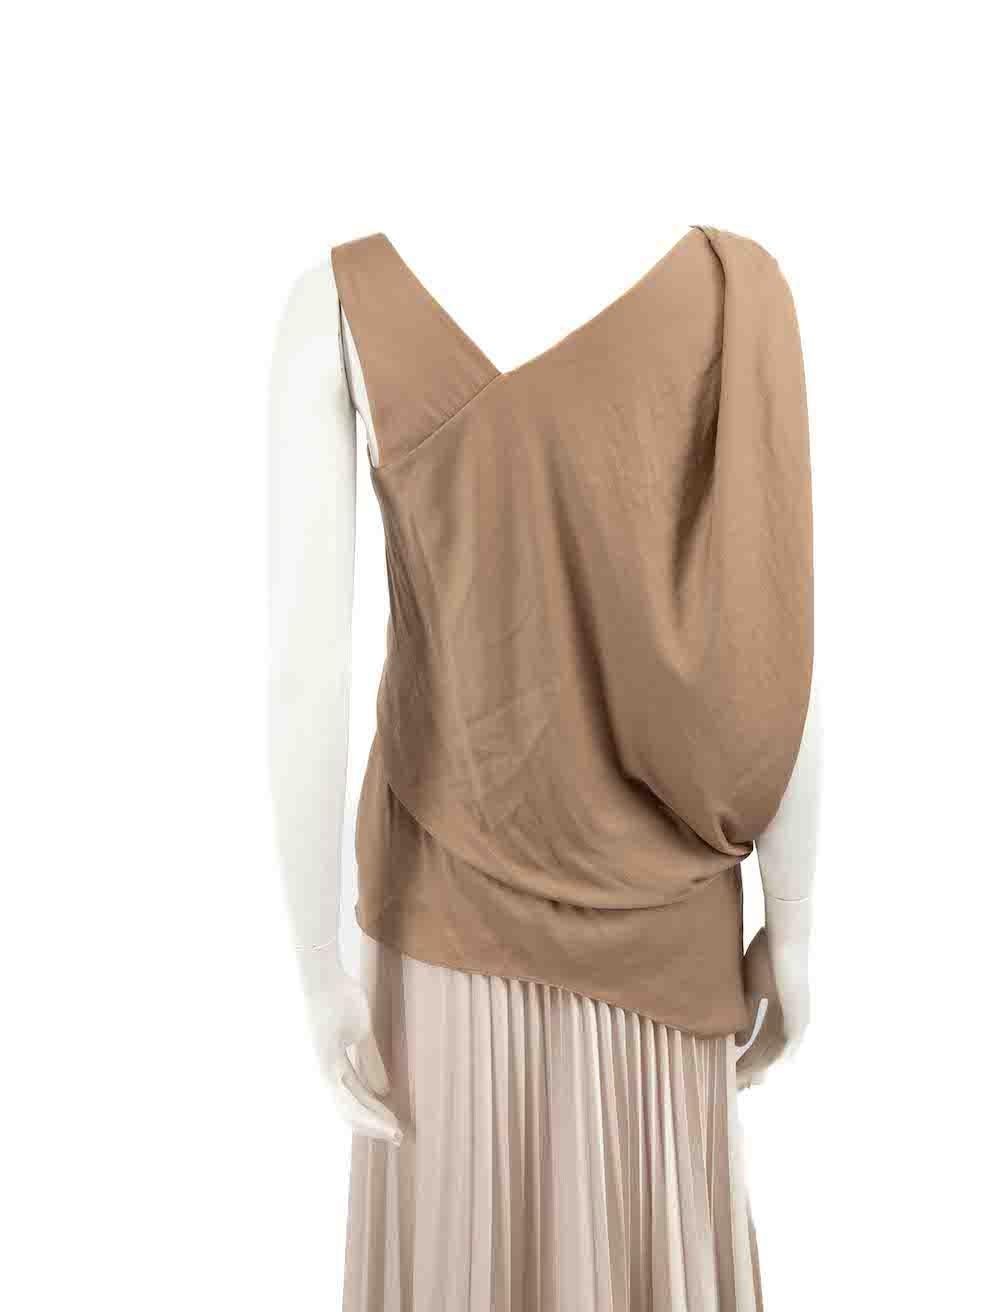 Helmut Lang Brown Ruched Sleeveless Top Size M In Good Condition For Sale In London, GB